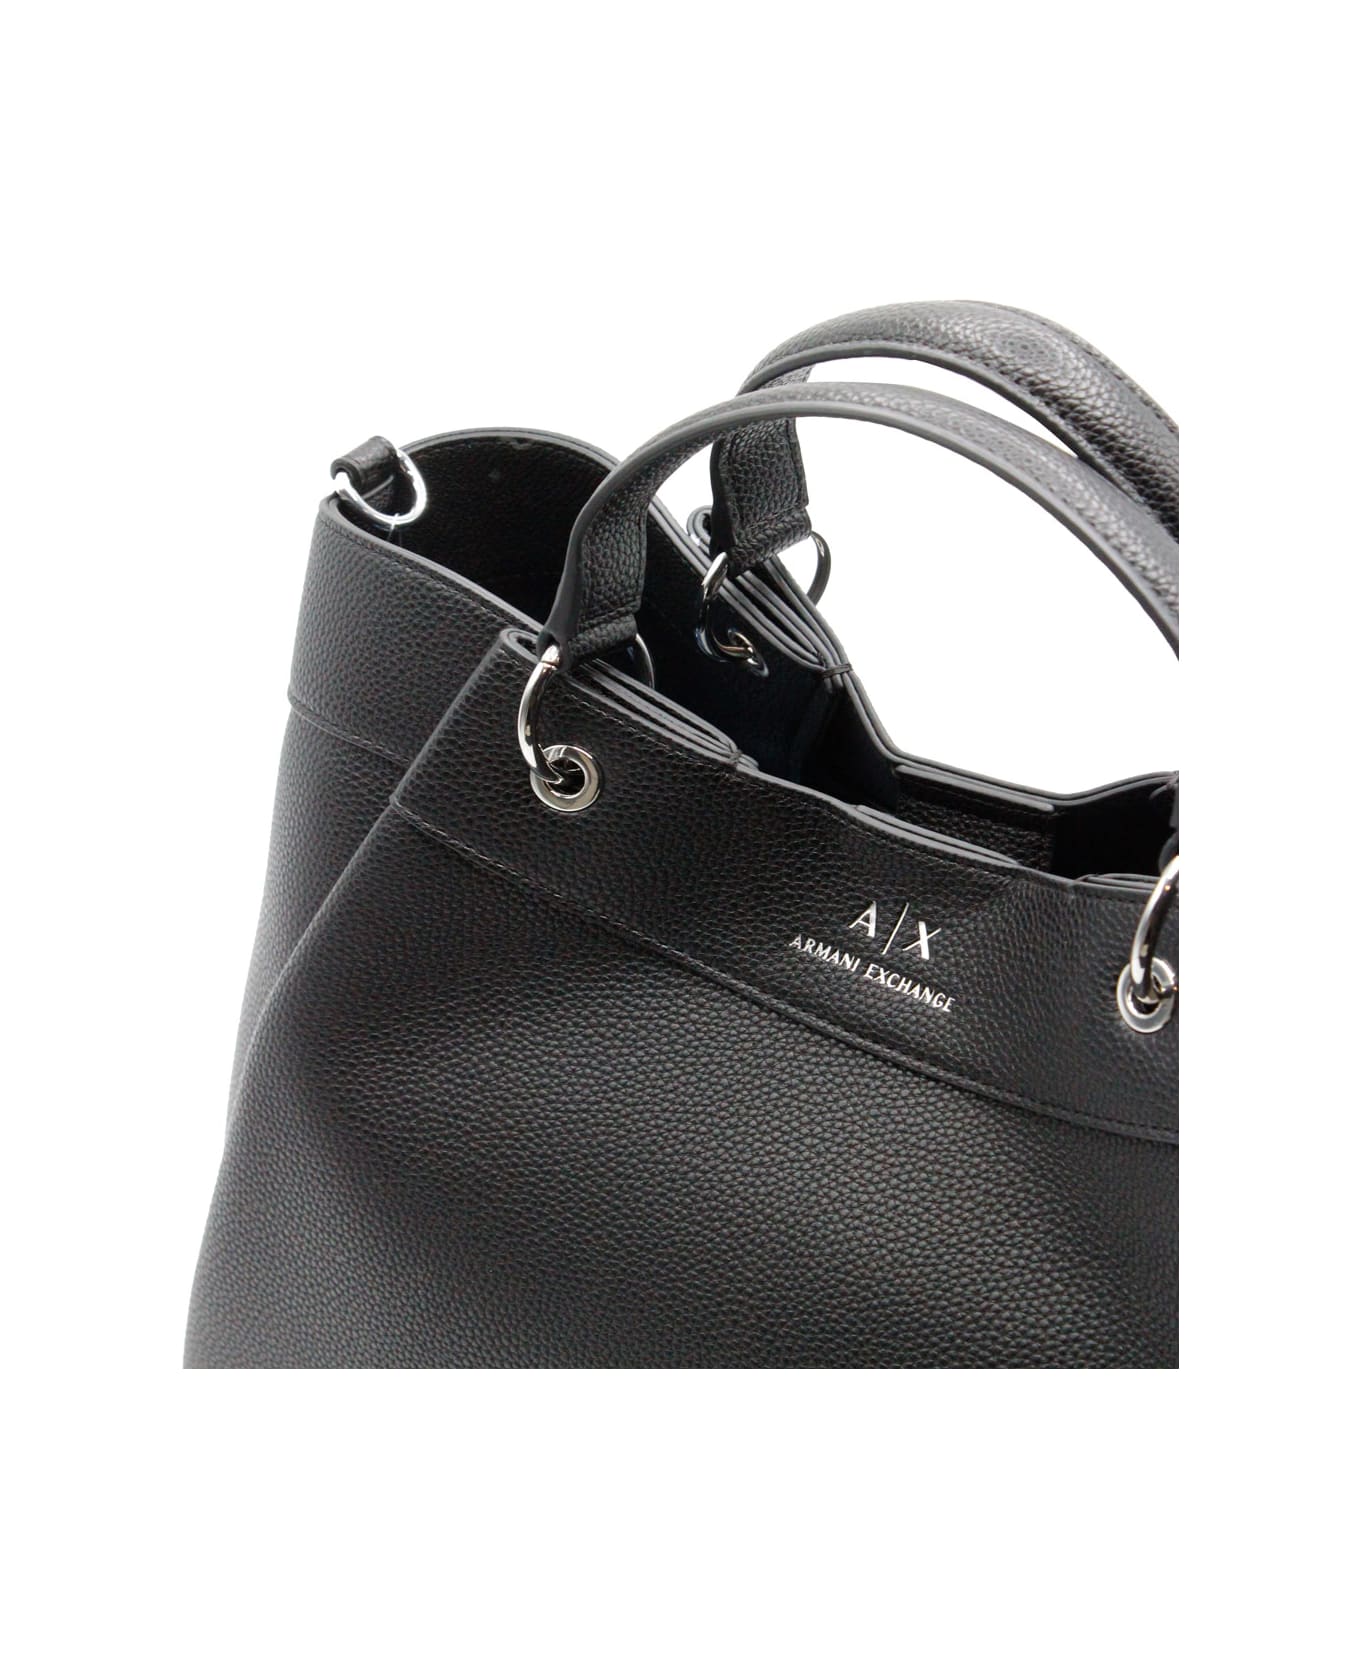 Armani Collezioni Handbag And Shoulder Bag Made Of Soft Faux Leather With Closure Button And Front Logo. Internal Pockets. - Black